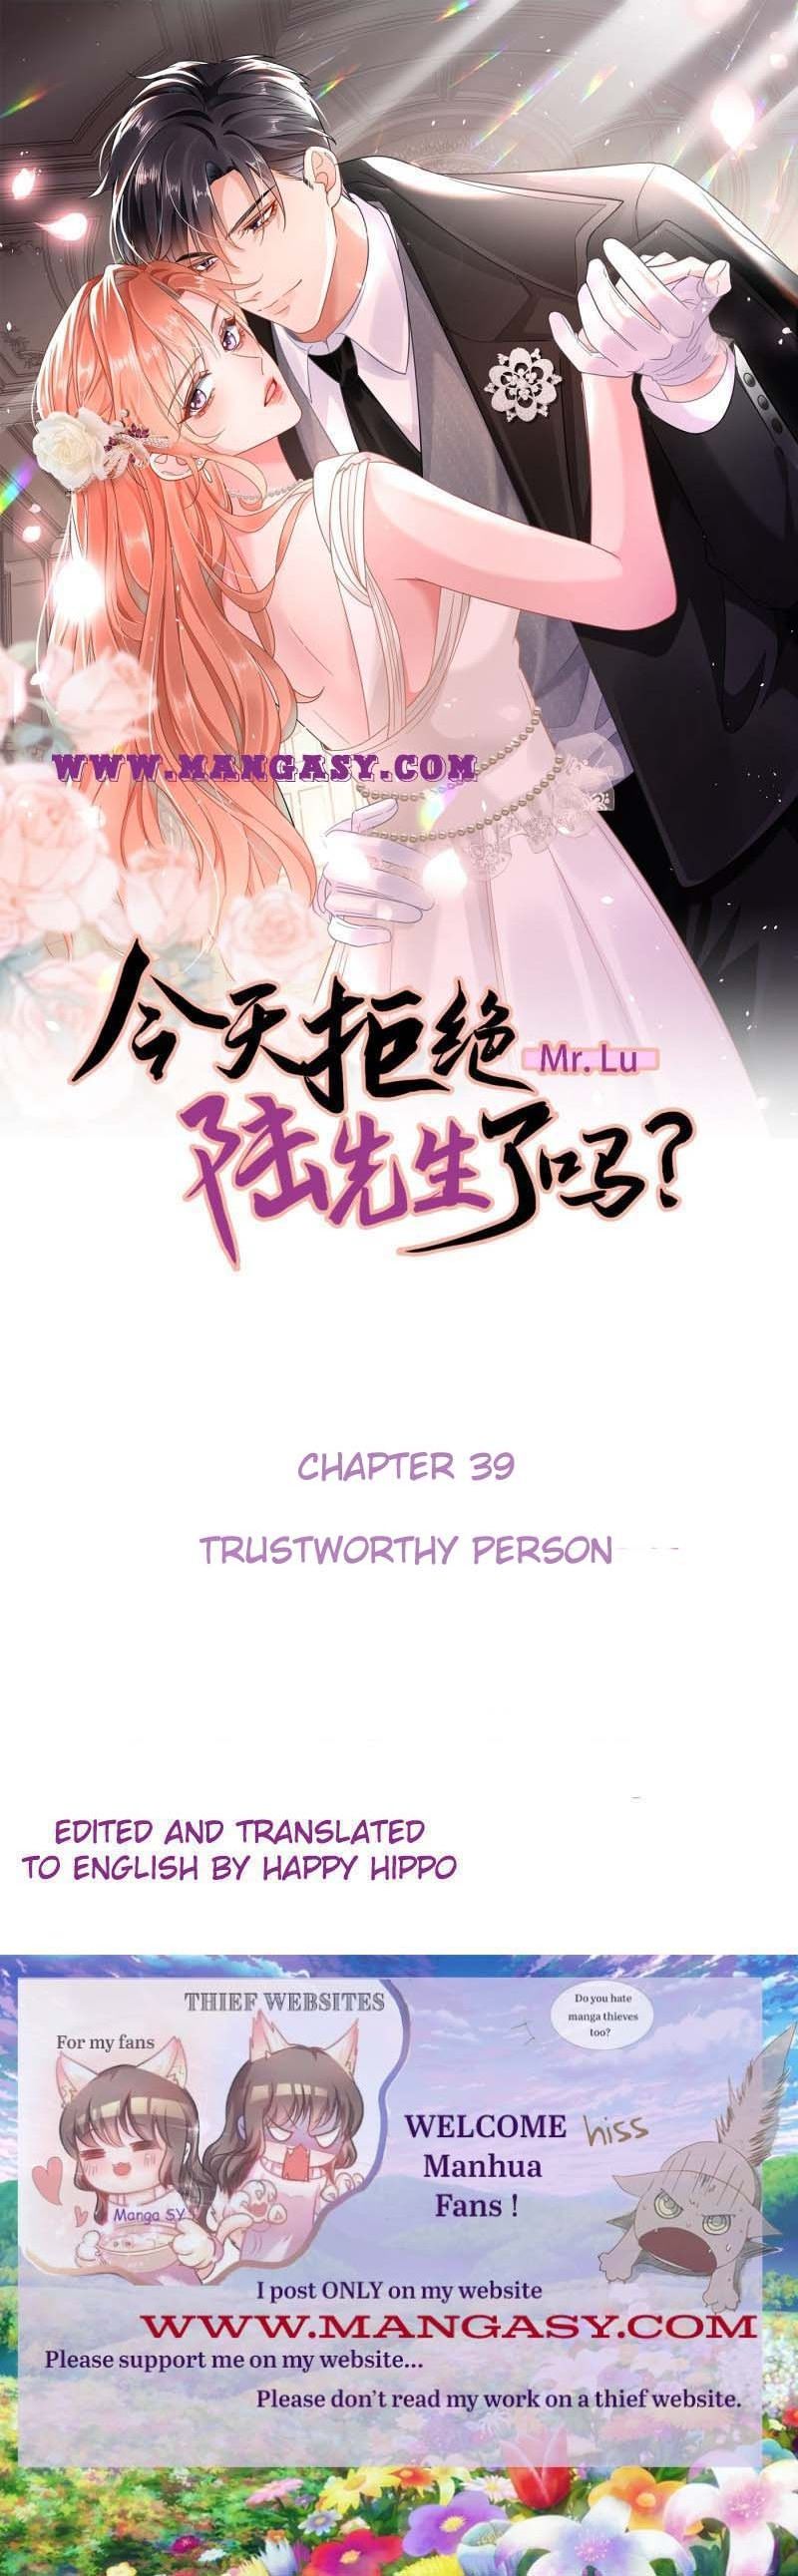 Did You Reject Mr.lu Today? Chapter 39 #1